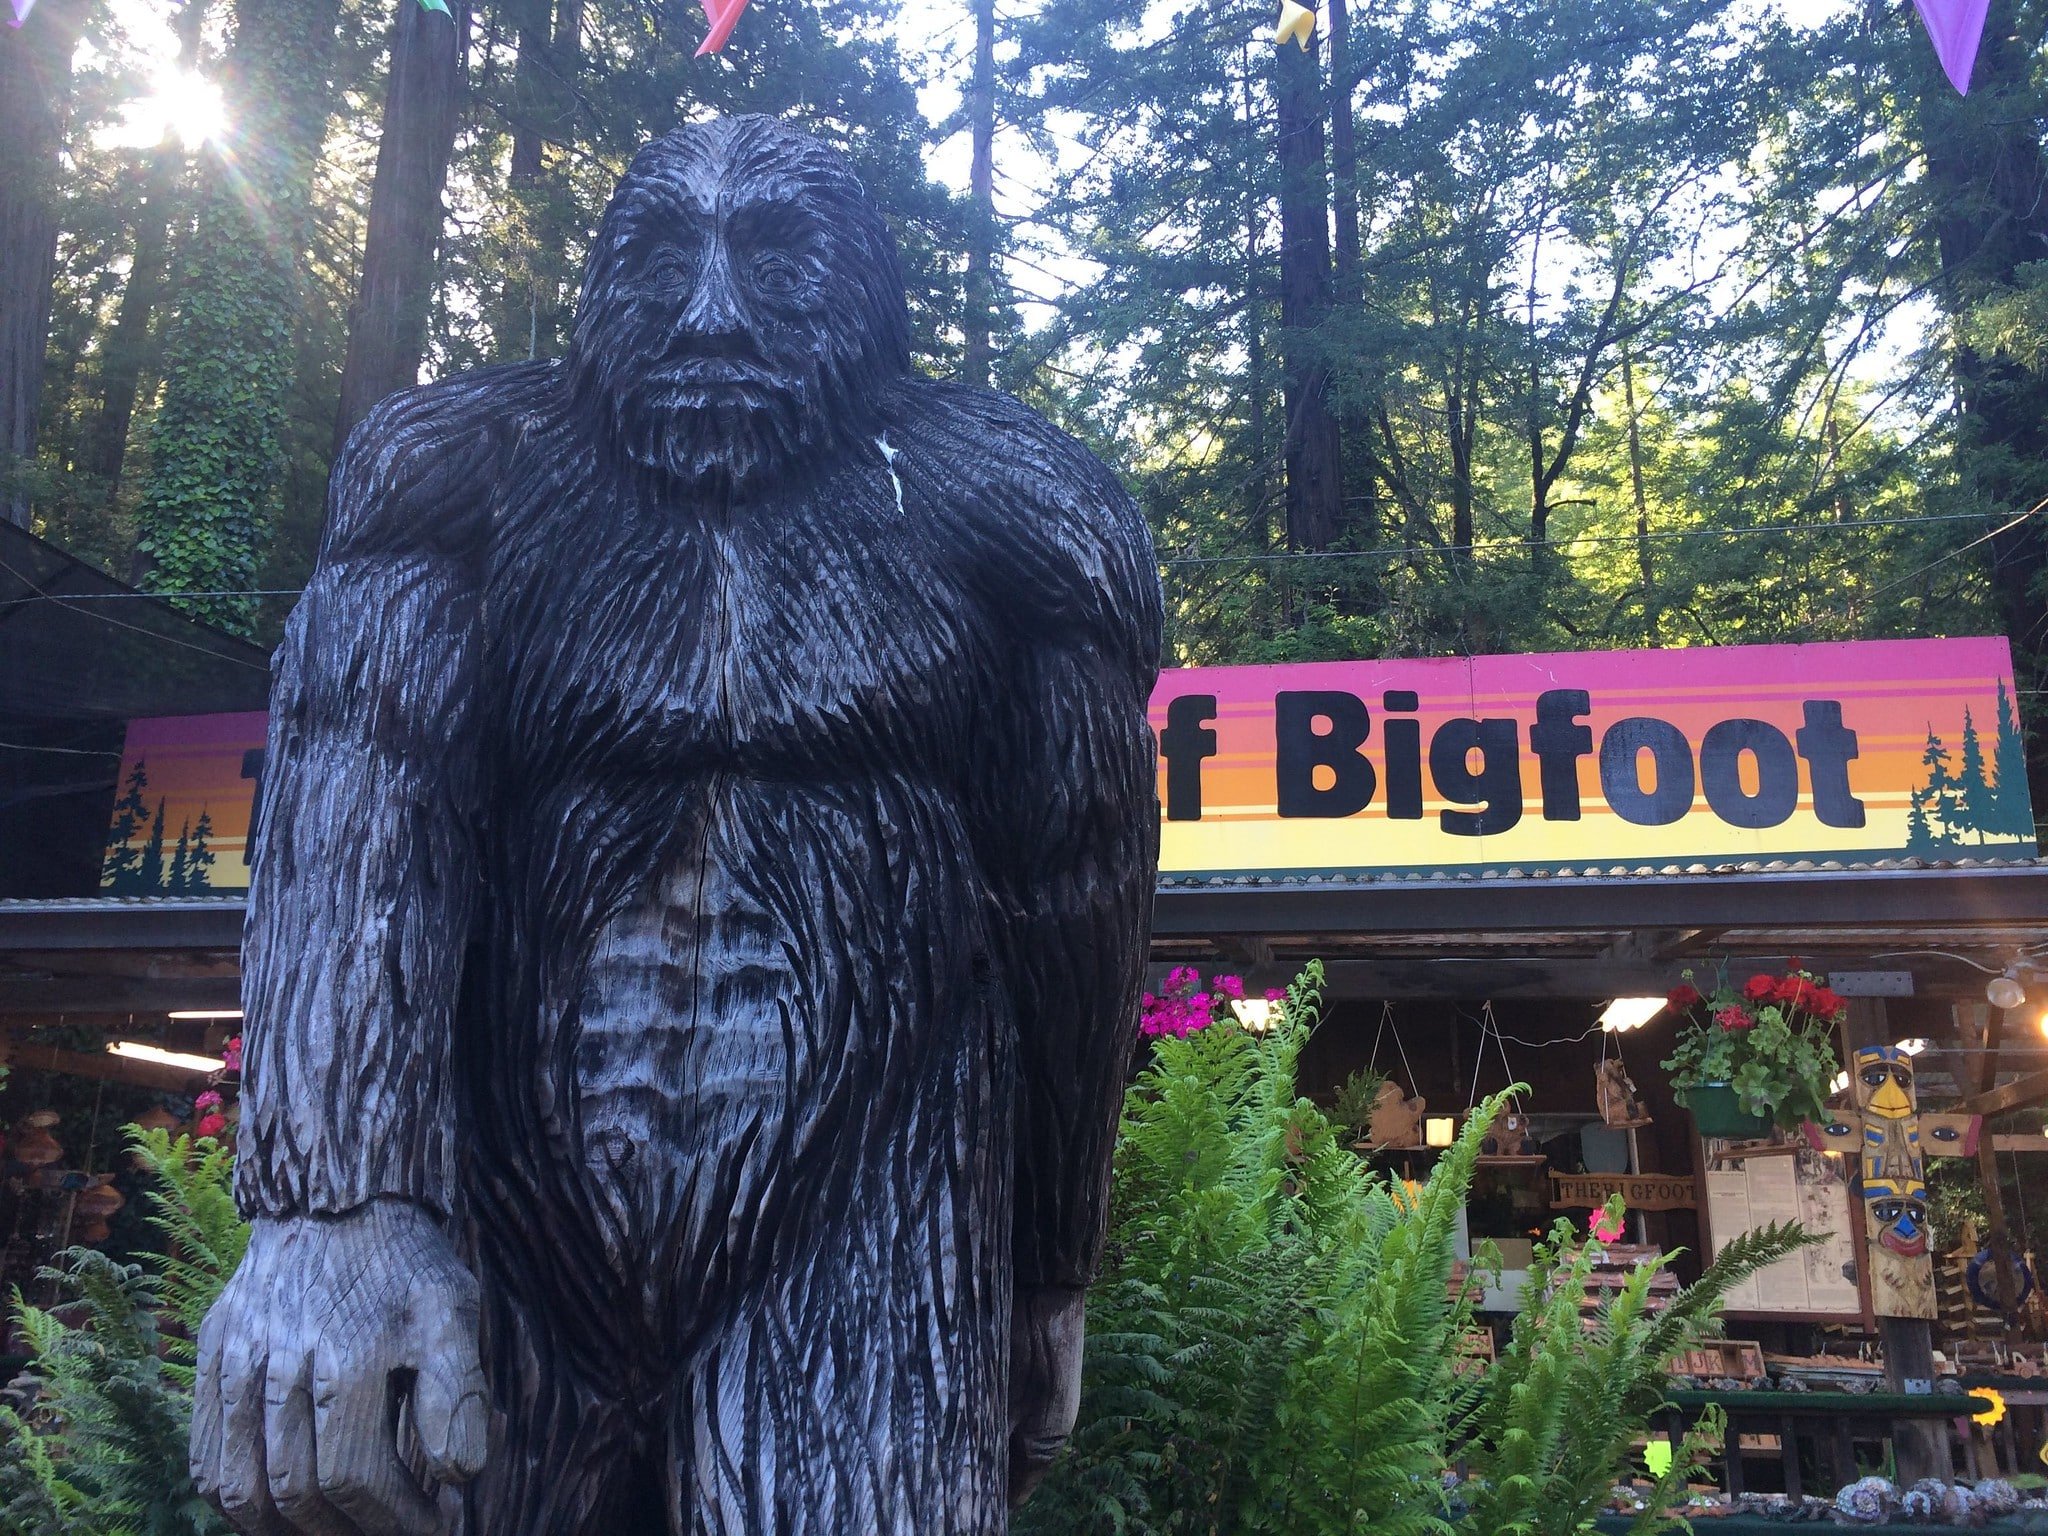 Why Do So Many People Still Want to Believe in Bigfoot?, History